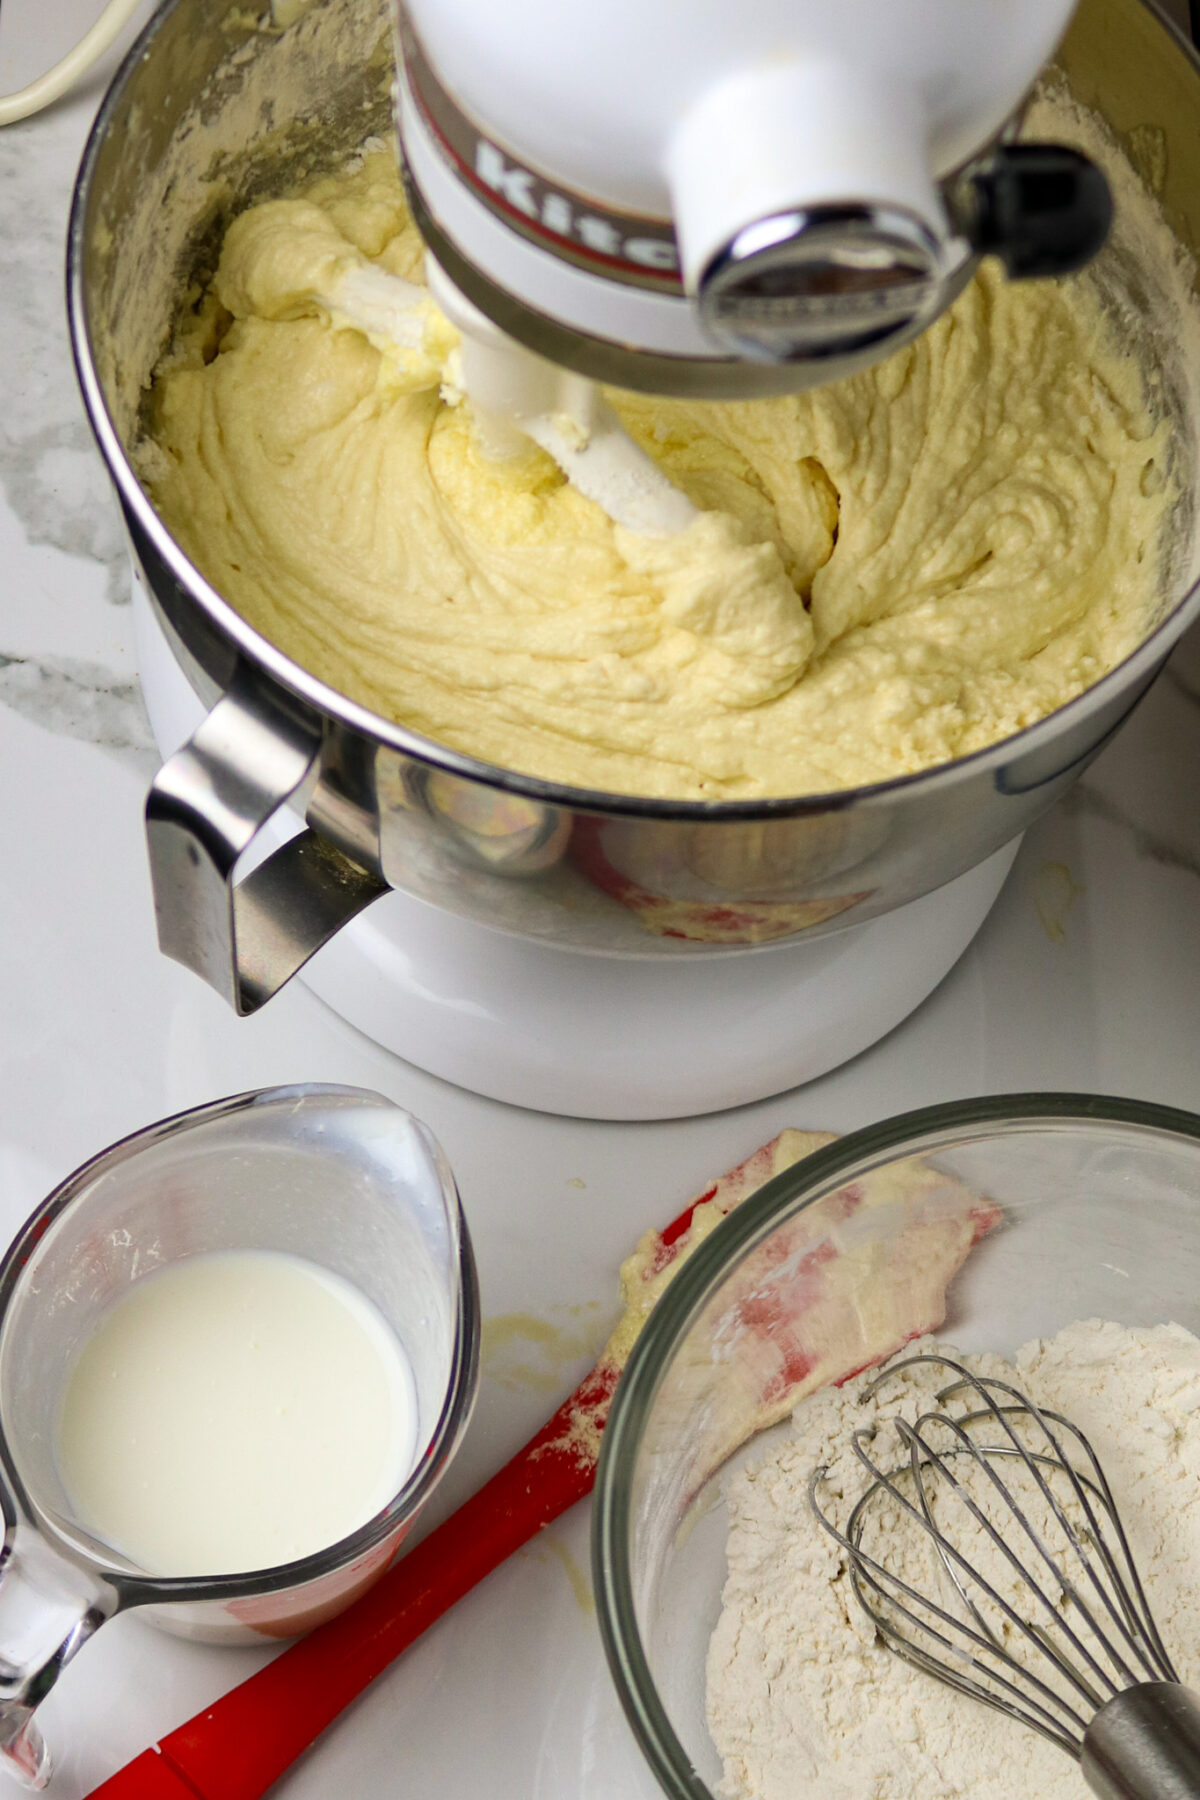 A stand mixer with batter in the bowl and a cup of buttermilk and a bowl of dry ingredients next to it.